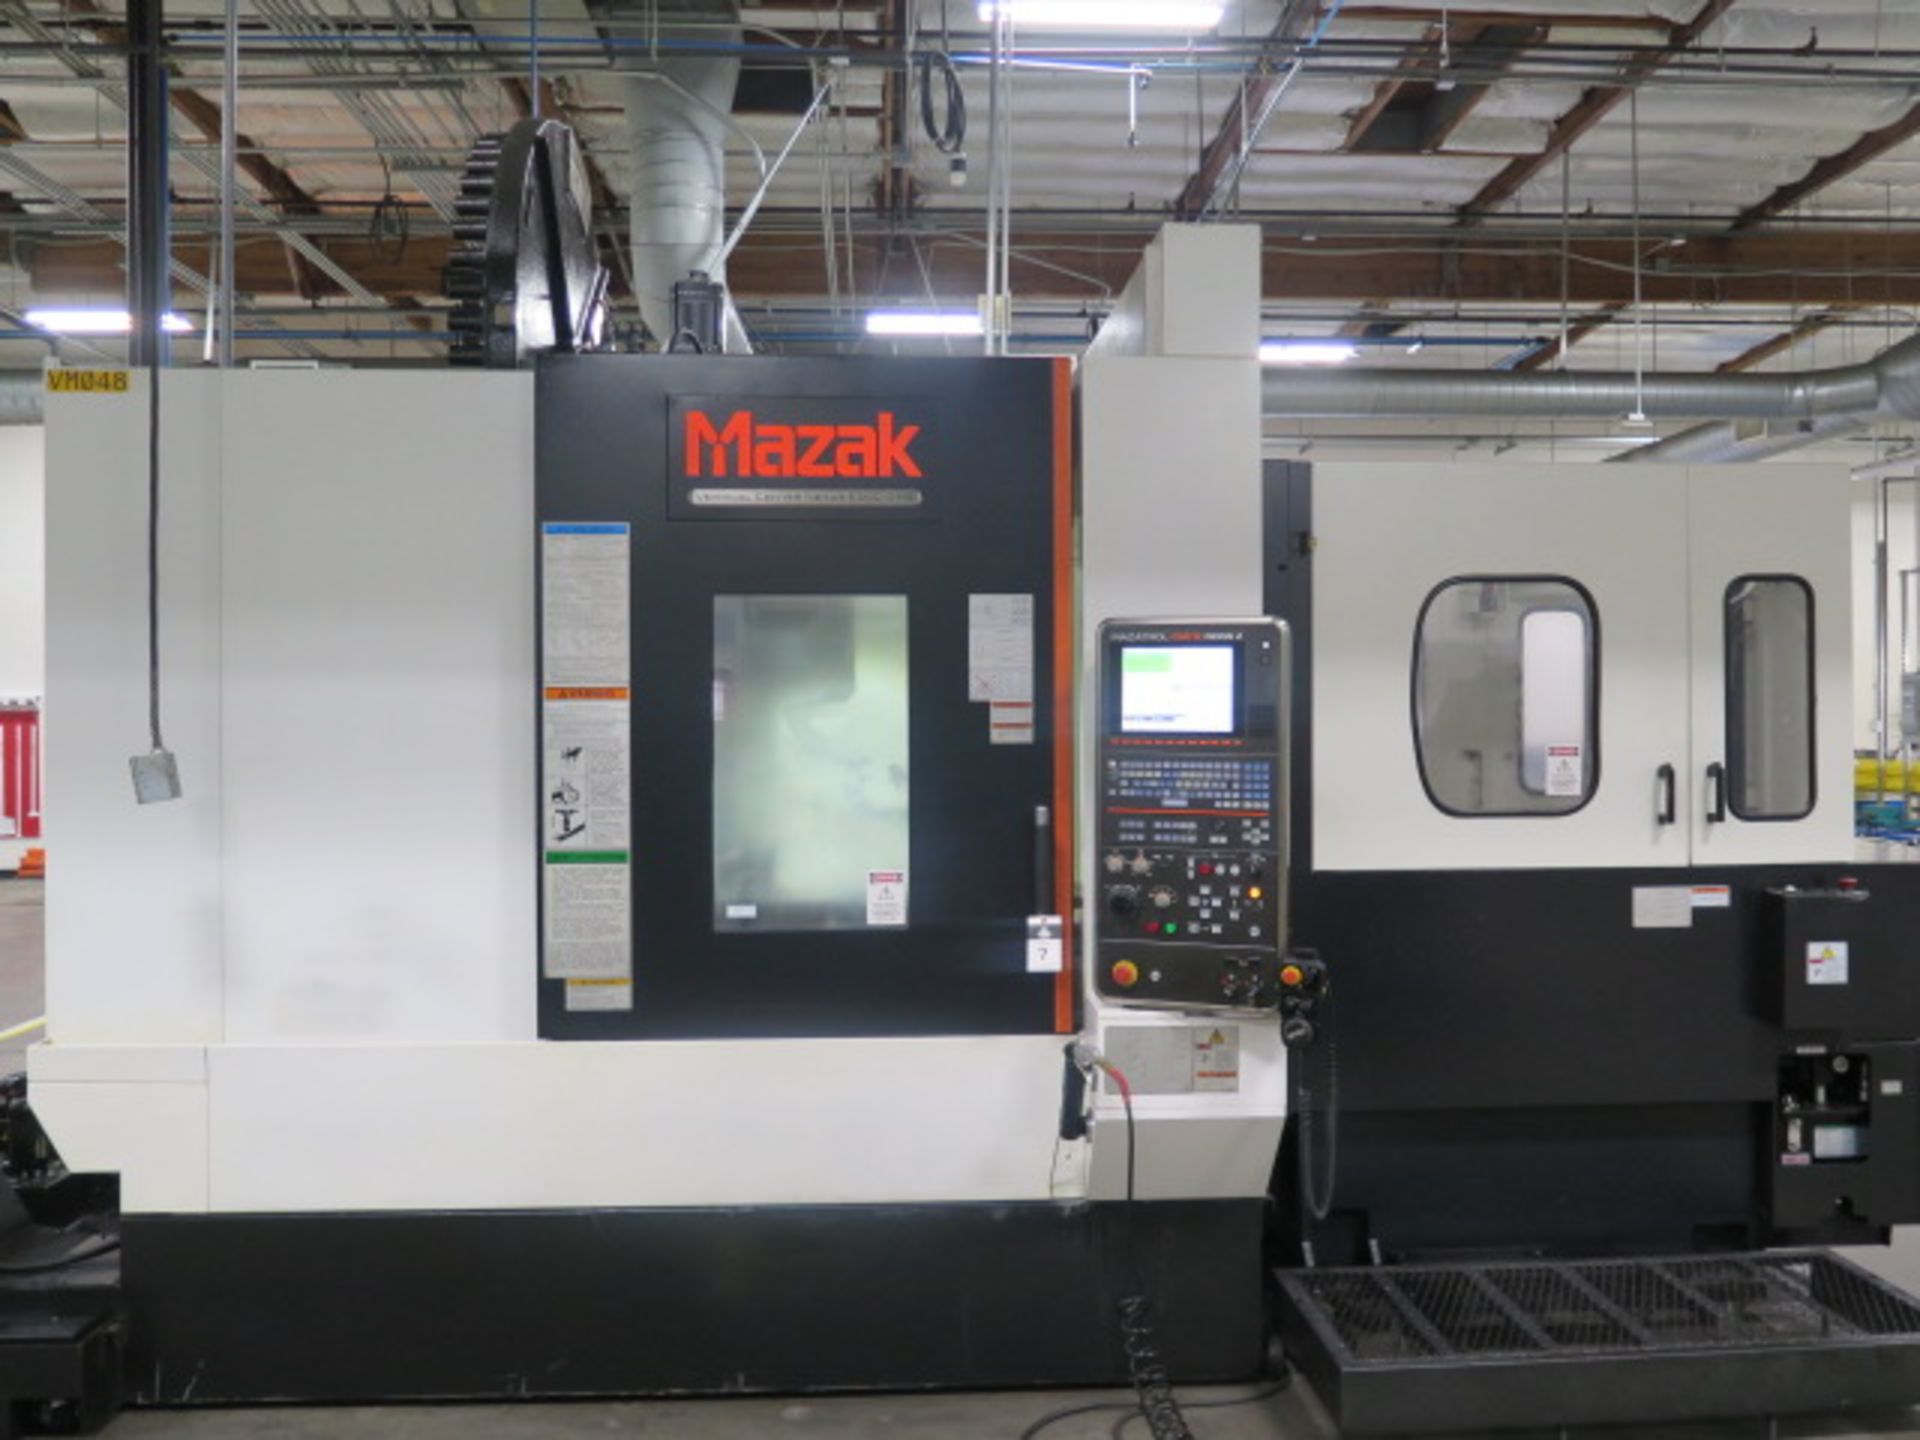 State of The Art” Mazak & Haas Semi Conductor MFG Facility - Image 4 of 8